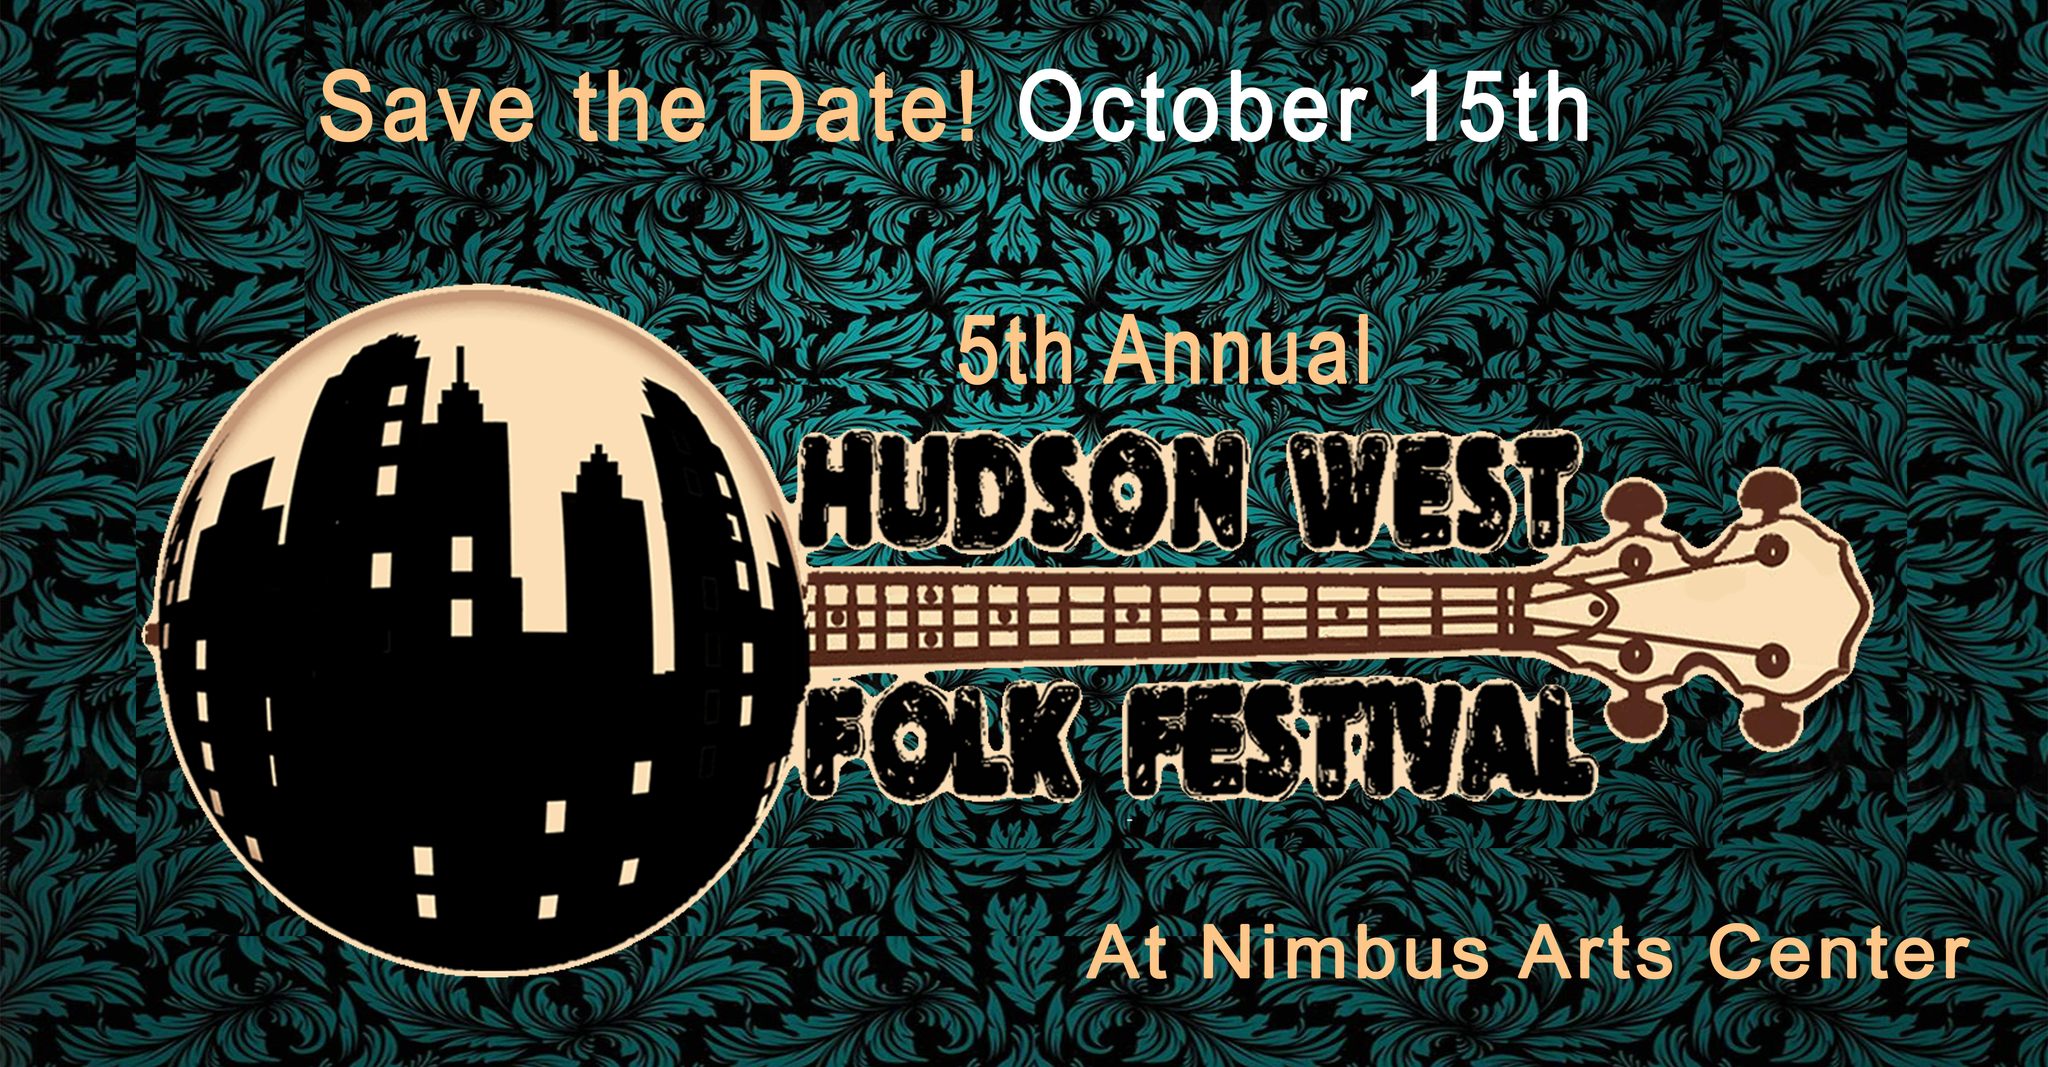 Flyer for the 5th Annual Hudson West Folk Festival at Nimbus Arts Center; October 15th 2022